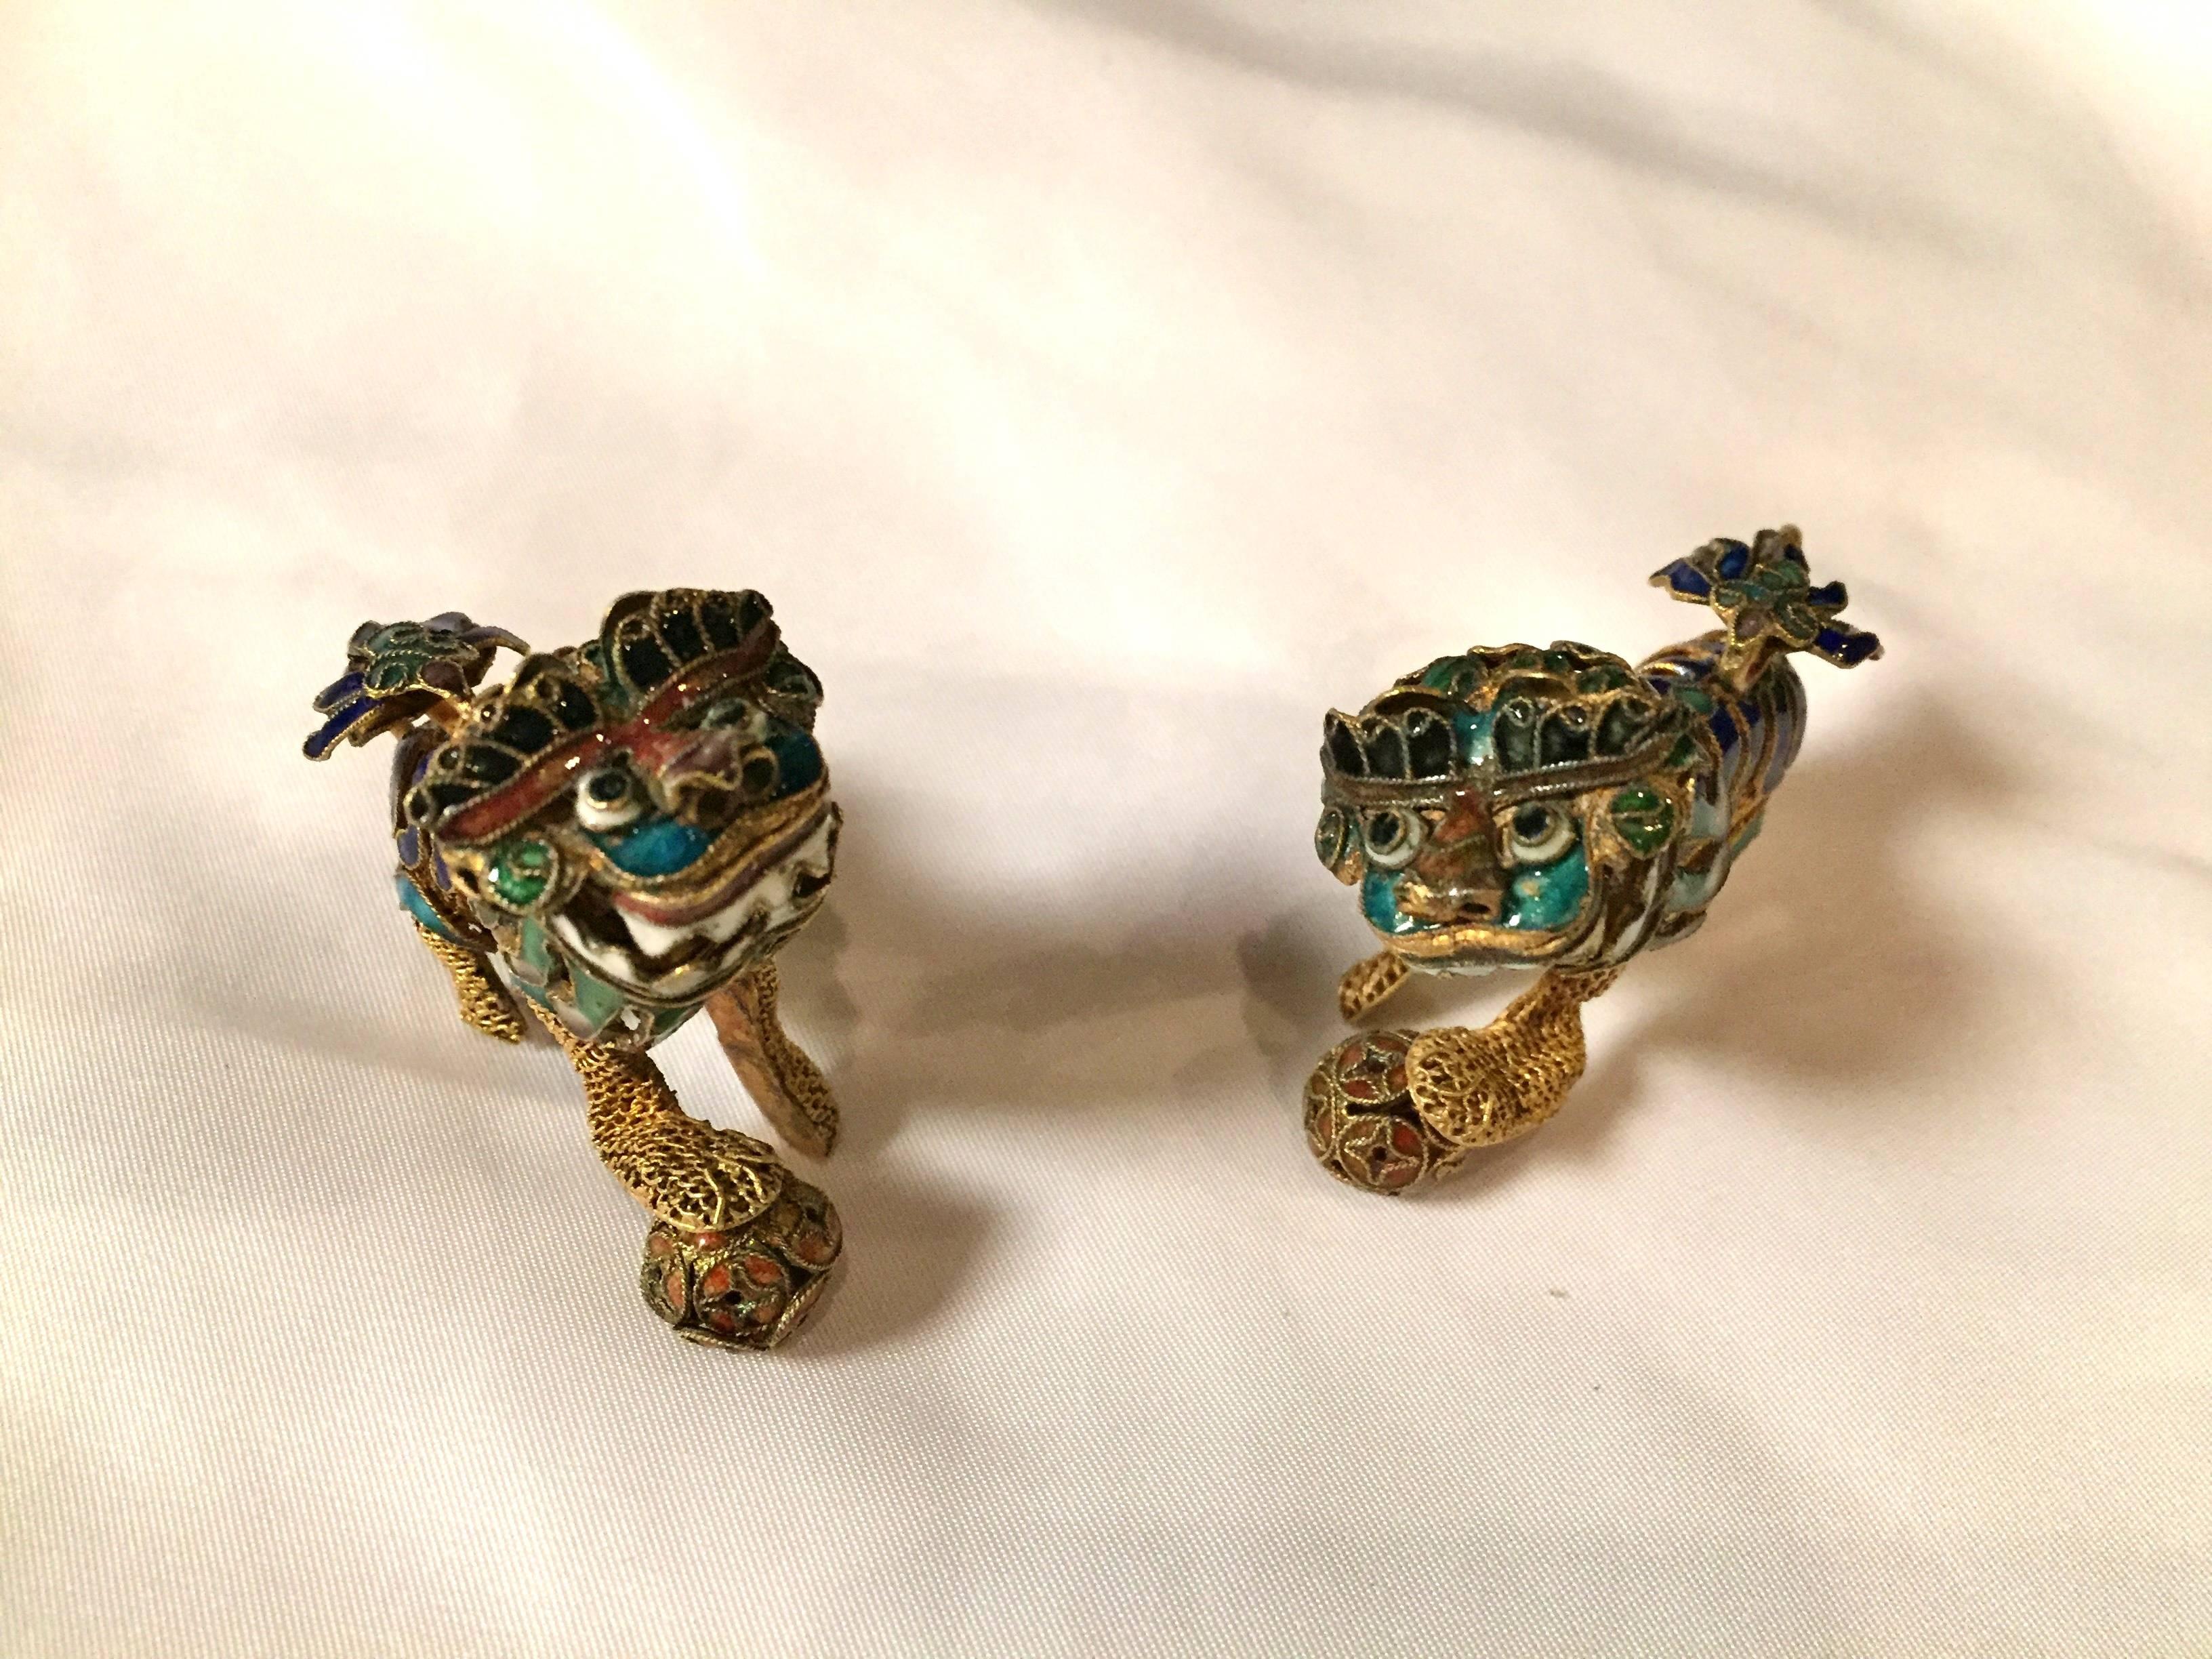 This pair of enamel foo dogs are exquisite. Their heads and one of the balls move with motion. The balls feature enameled coin patterns and are finely trimmed with brass wires. The colors used here are turquoise, lapis, dusty rose and white. The